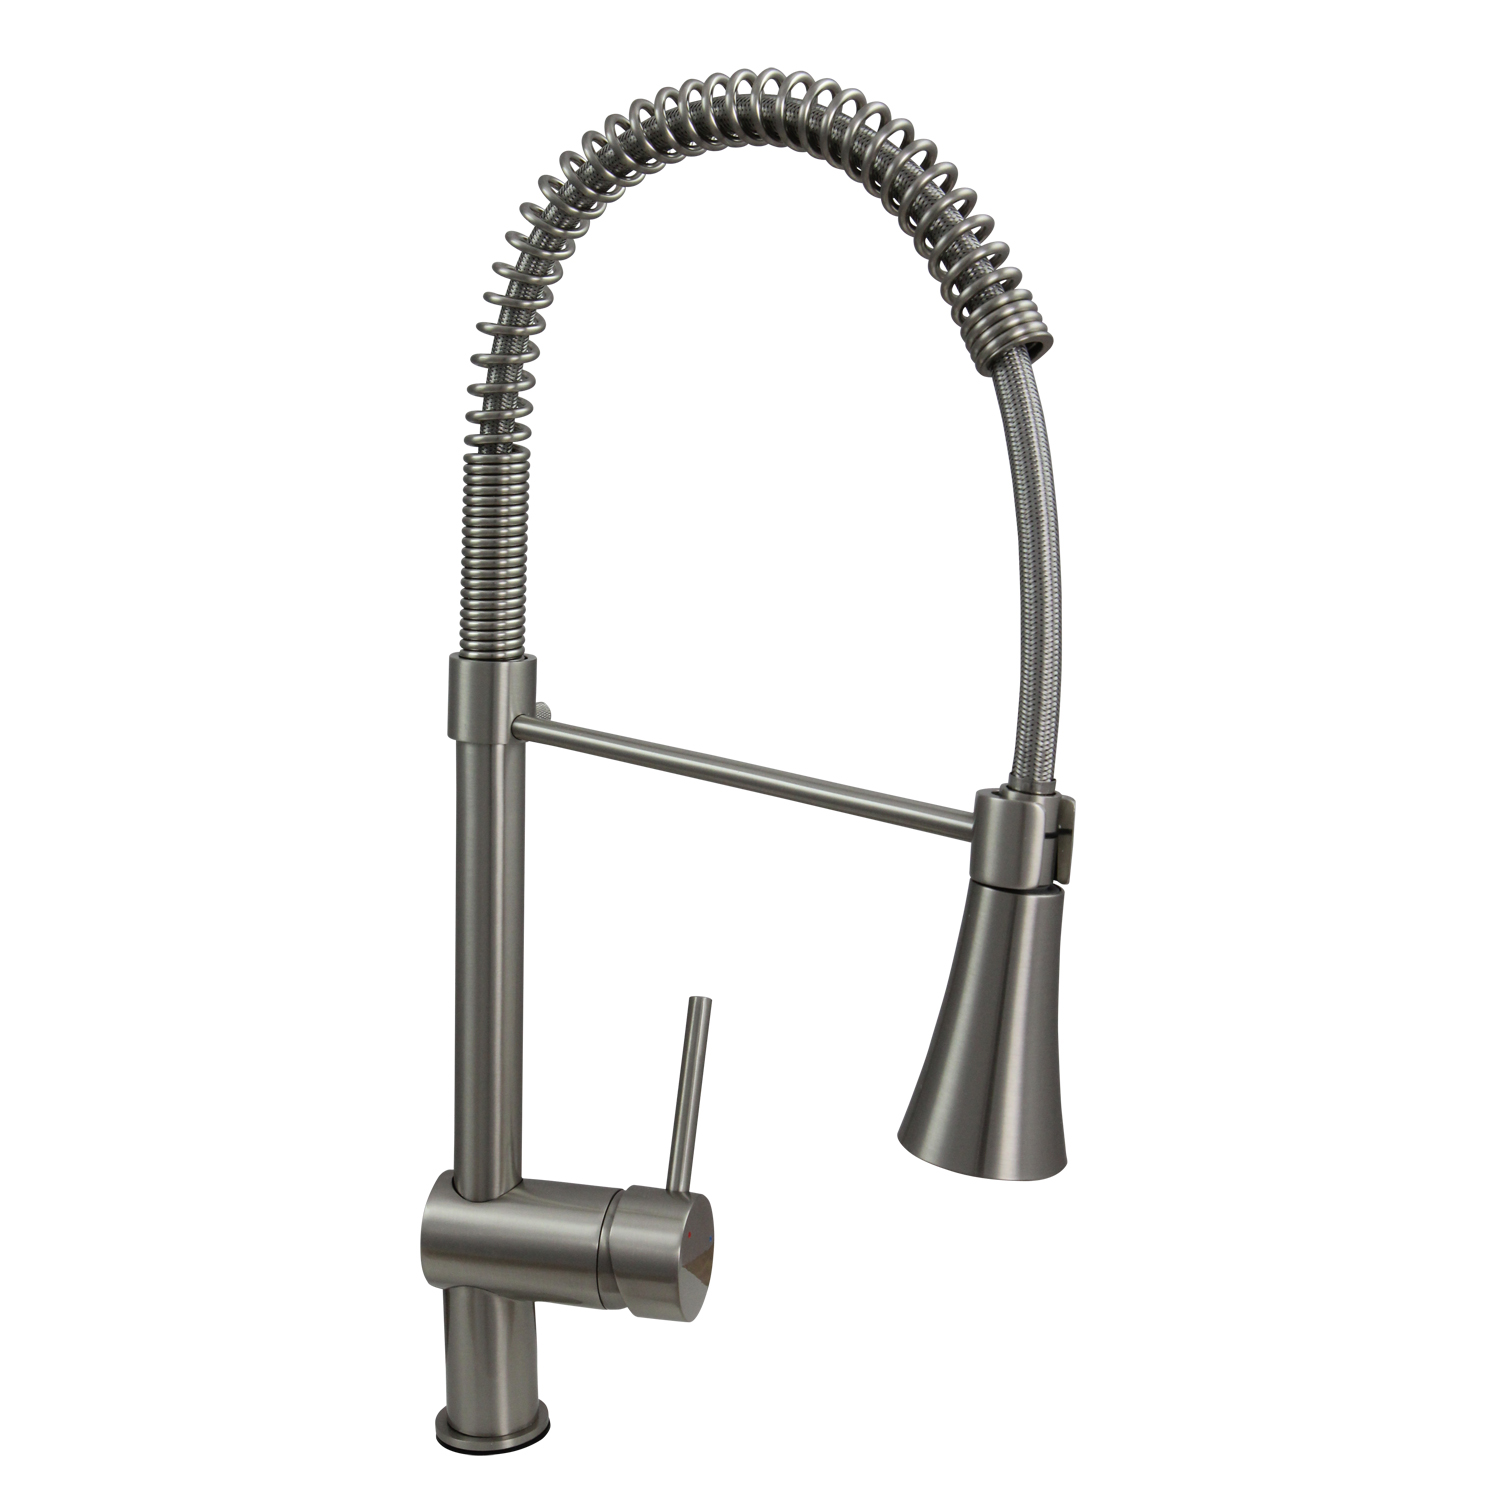 Dyconn 22-inch Contemporary Kitchen Brushed Nickel Swivel Faucet - 22' Swivel Spring Faucet